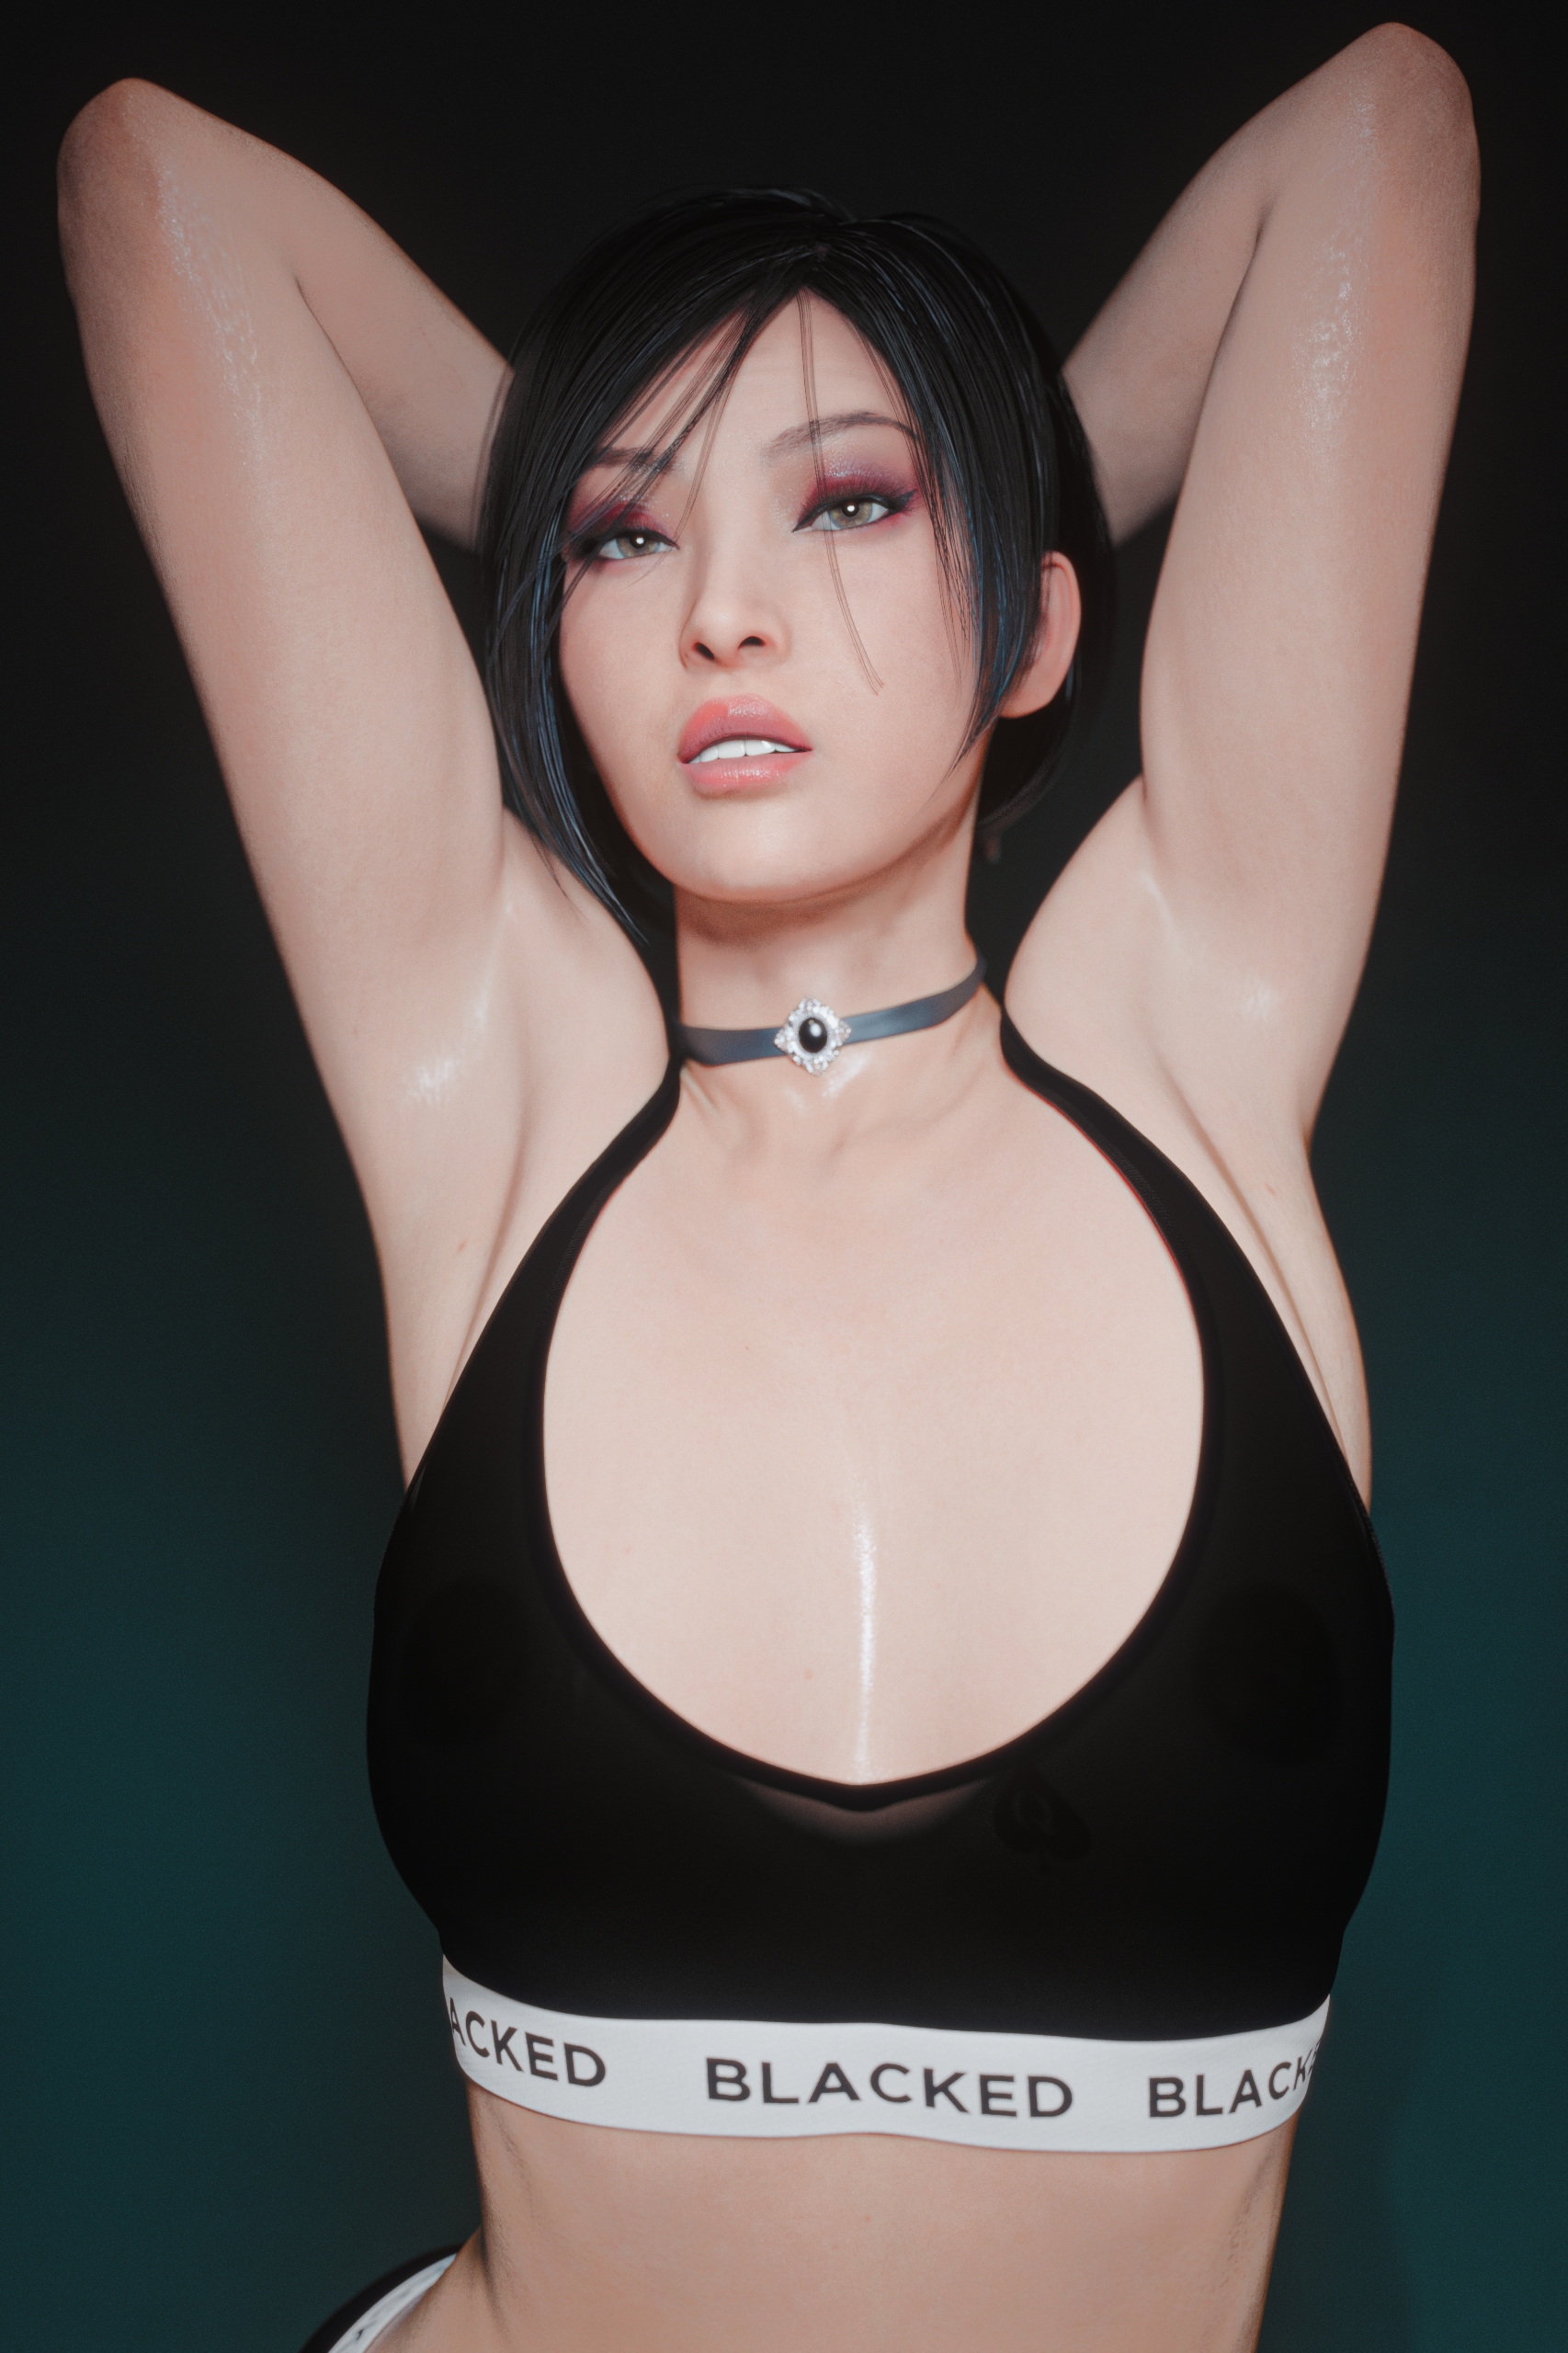 General 1706x2560 Ada Wong Resident Evil 2 Remake Resident Evil Blacked blacked clothes standing boobs fictional character Capcom video games arms up armpits frontal view parted lips arm(s) behind head edit looking at viewer choker video game characters CGI video game girls teeth portrait display